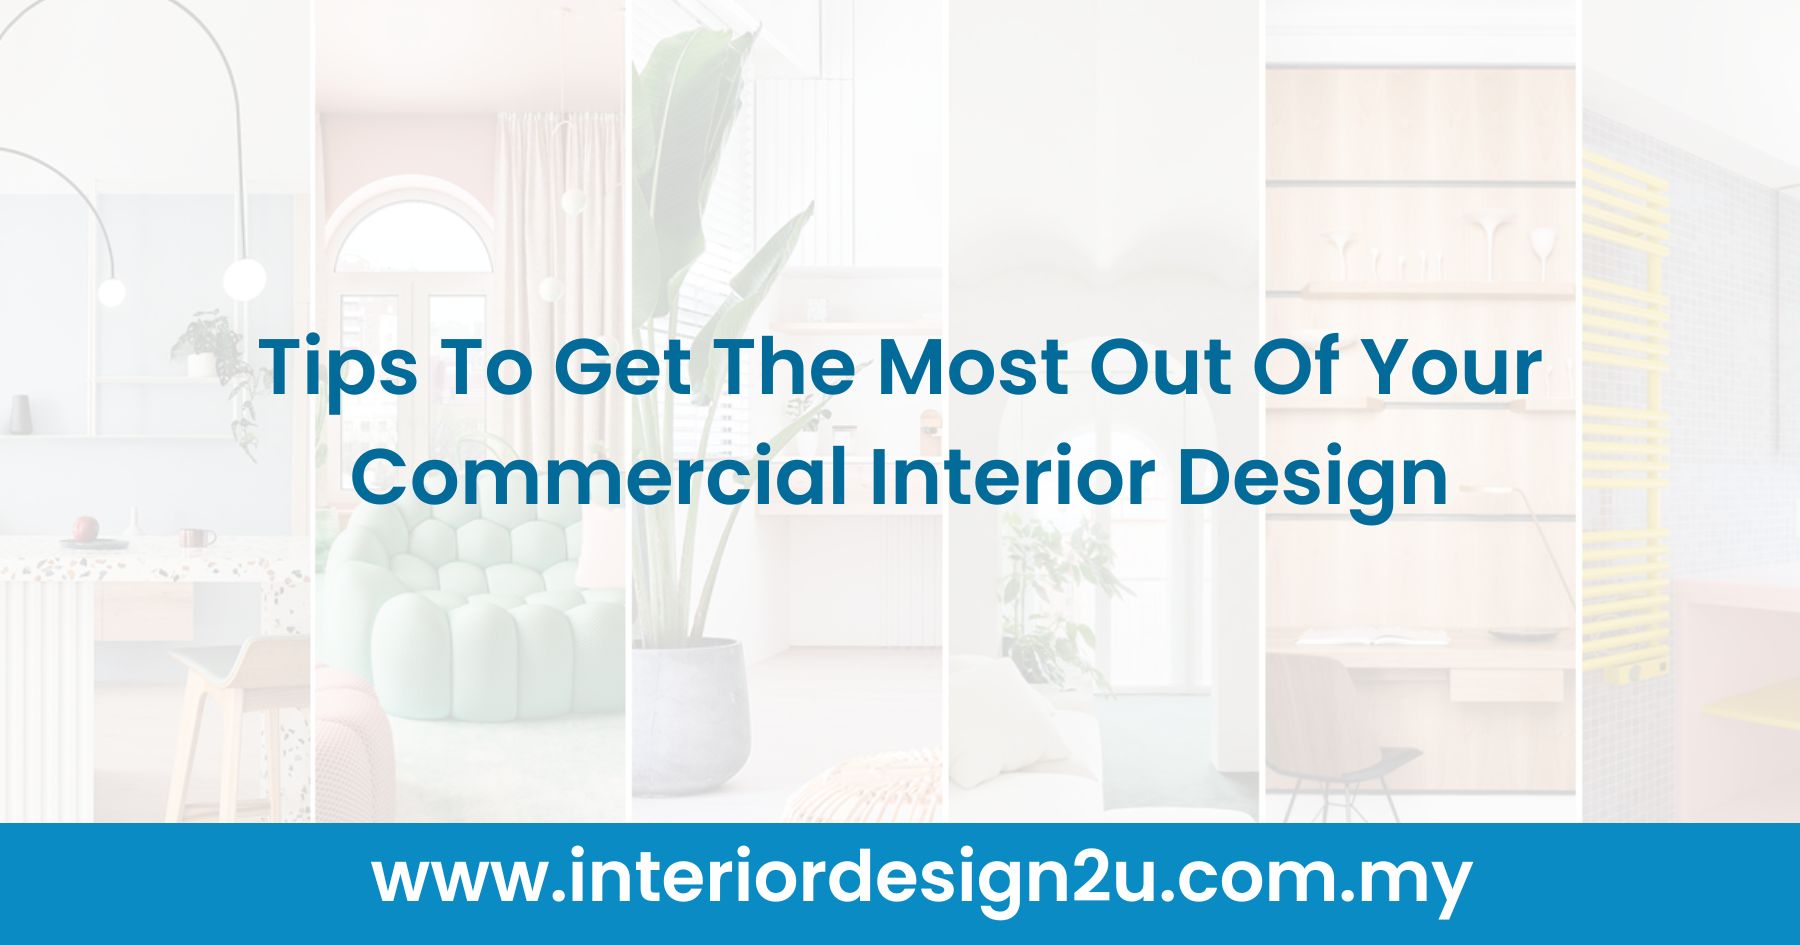 Tips To Get The Most Out Of Your Commercial Interior Design